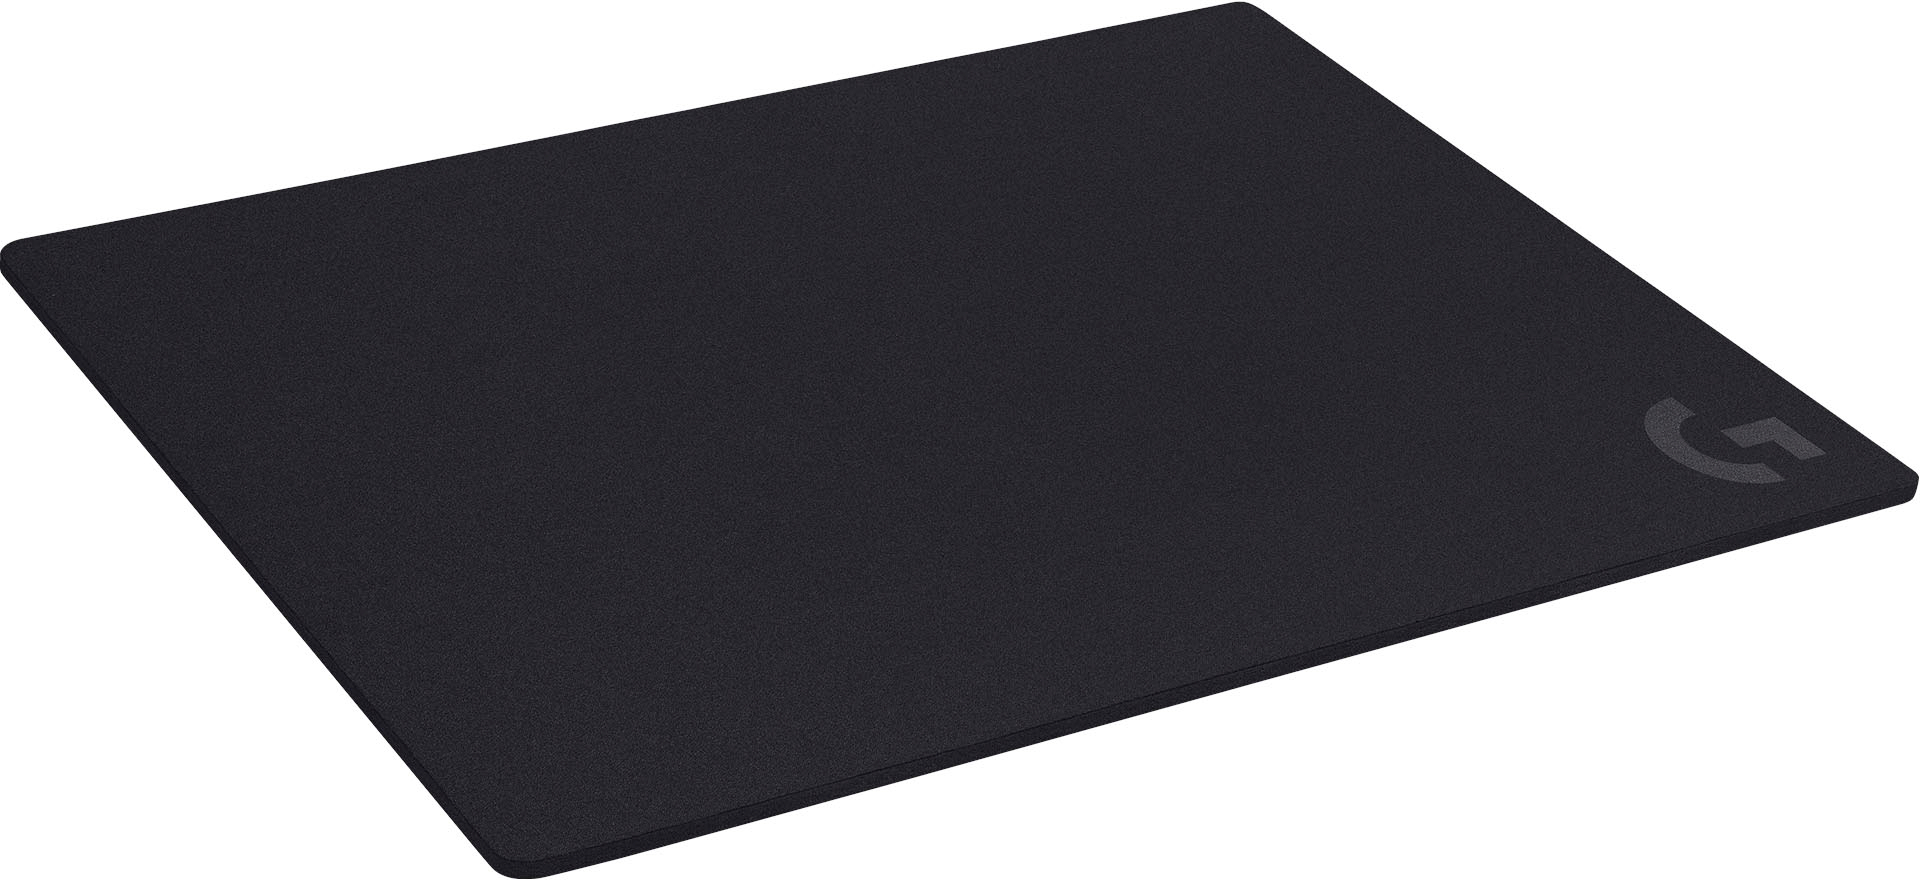 Logitech G740 Large Thick Cloth Gaming Mouse Pad